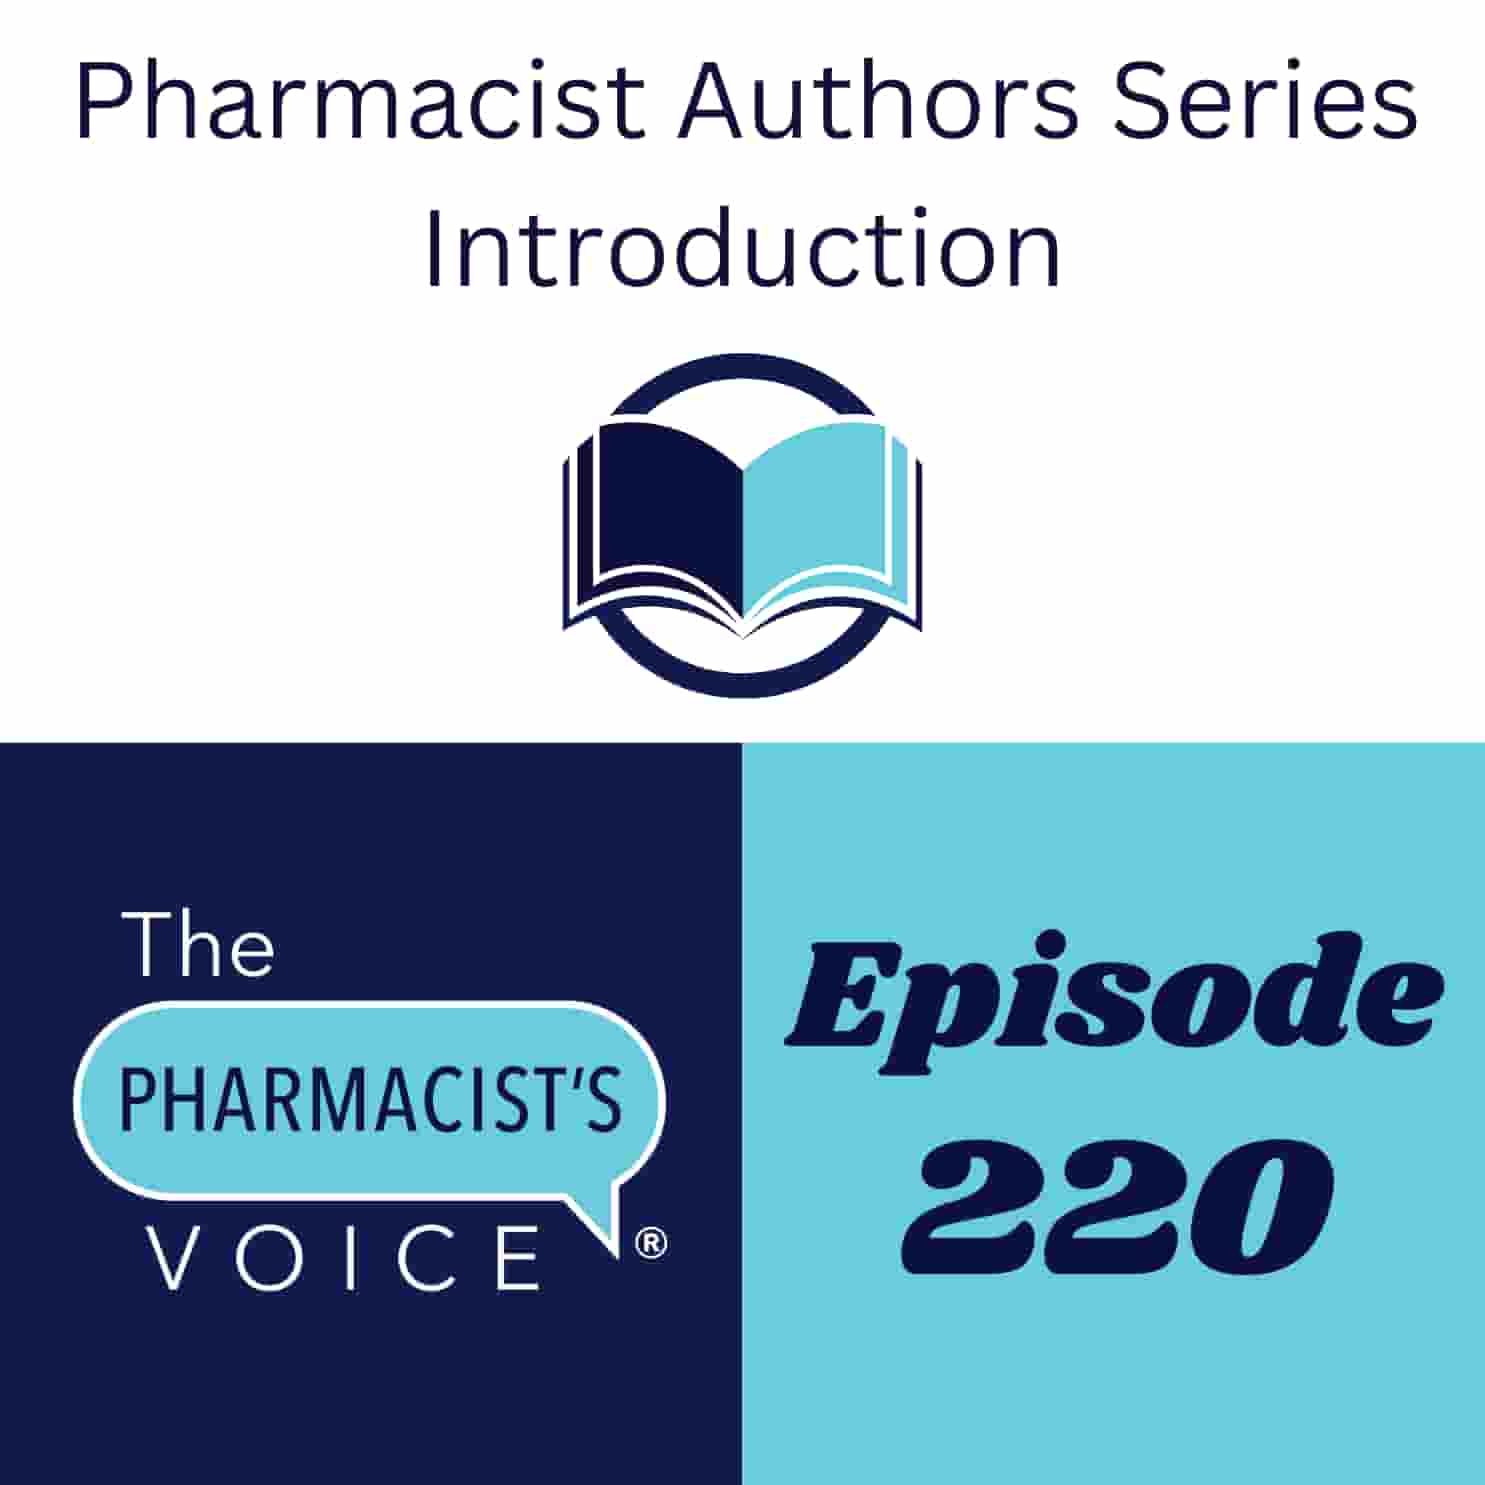 This is episode artwork for The Pharmacist's Voice Podcast Episode 220. The text says, "Pharmacist Authors Series Introduction. The Pharmacist's Voice. Episode 220."